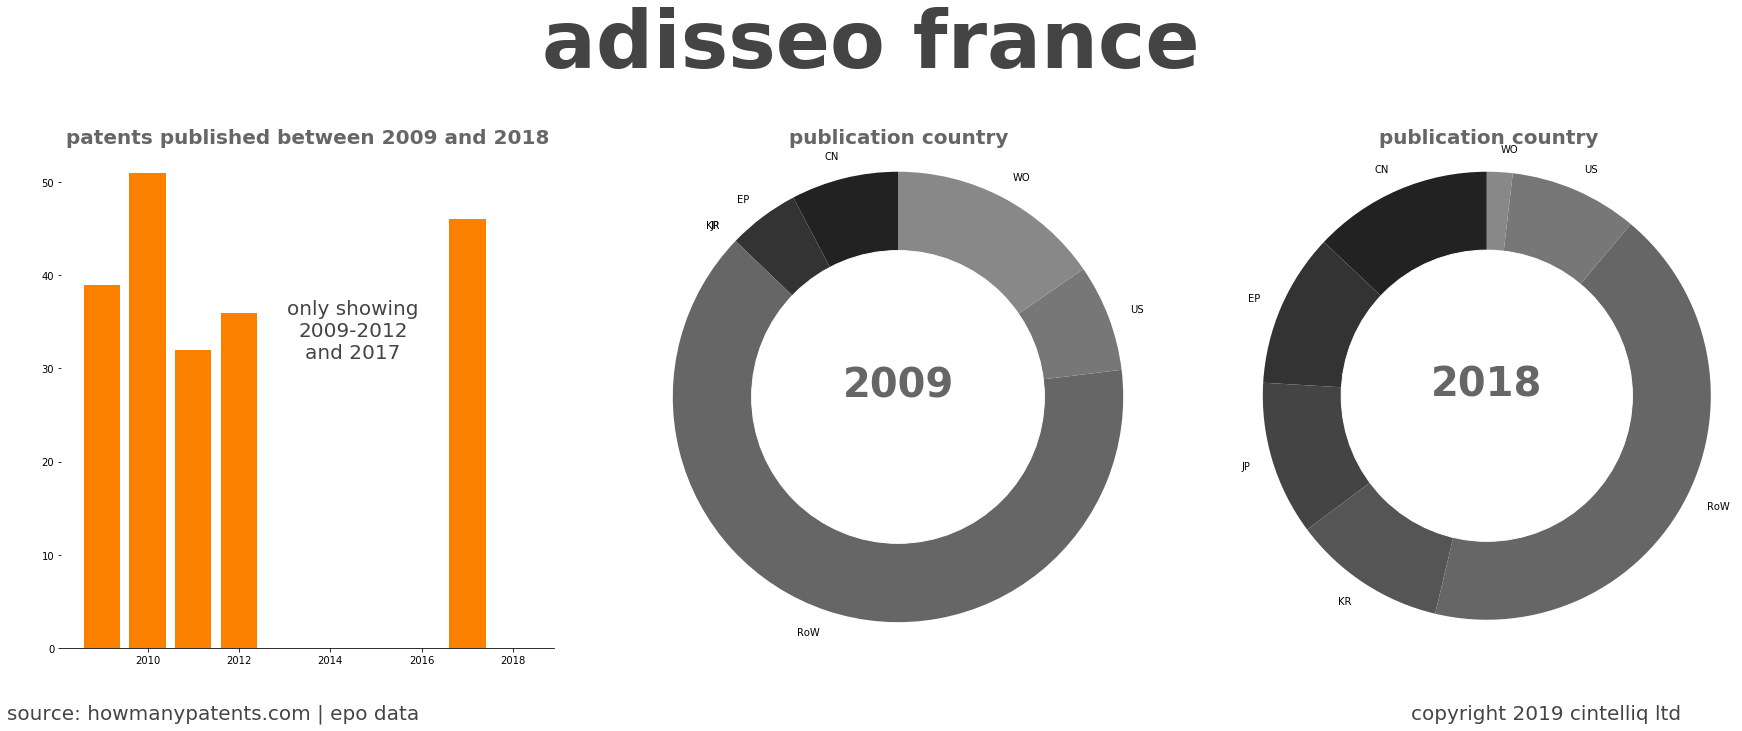 summary of patents for Adisseo France